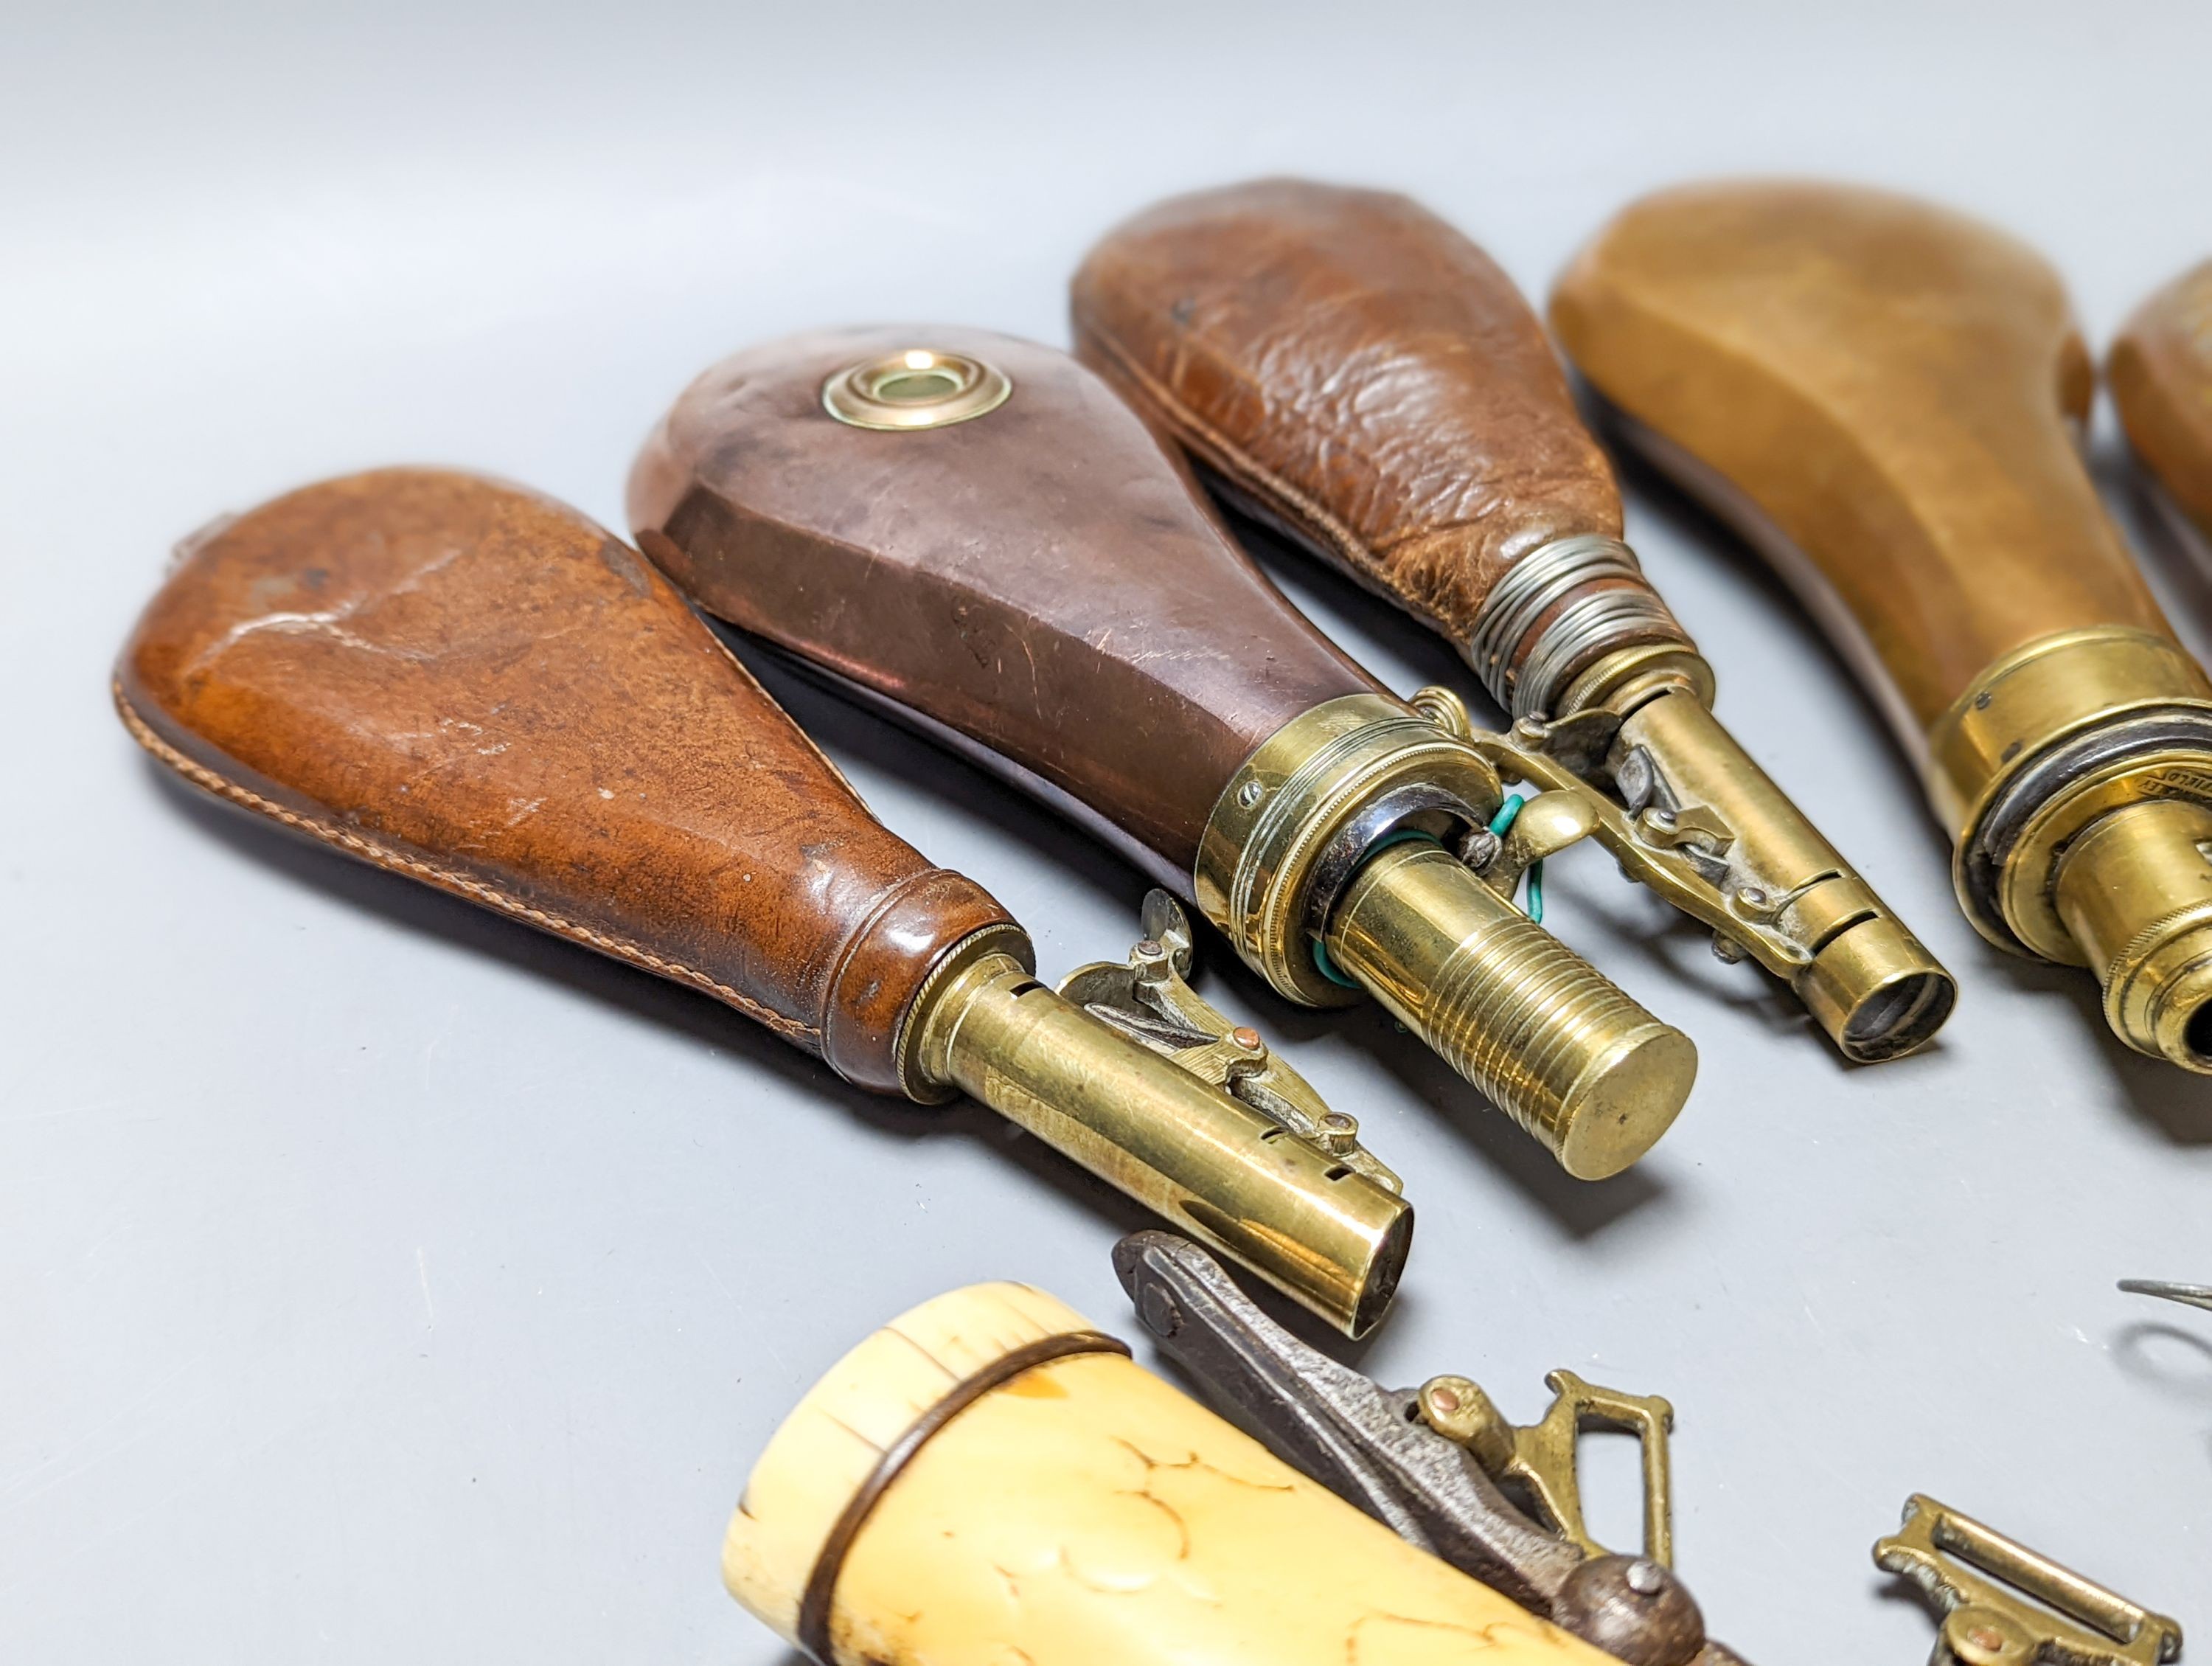 Six powder/shot flasks, 4 copper and brass, 2 leather and brass, together with a carved powder horn (7)